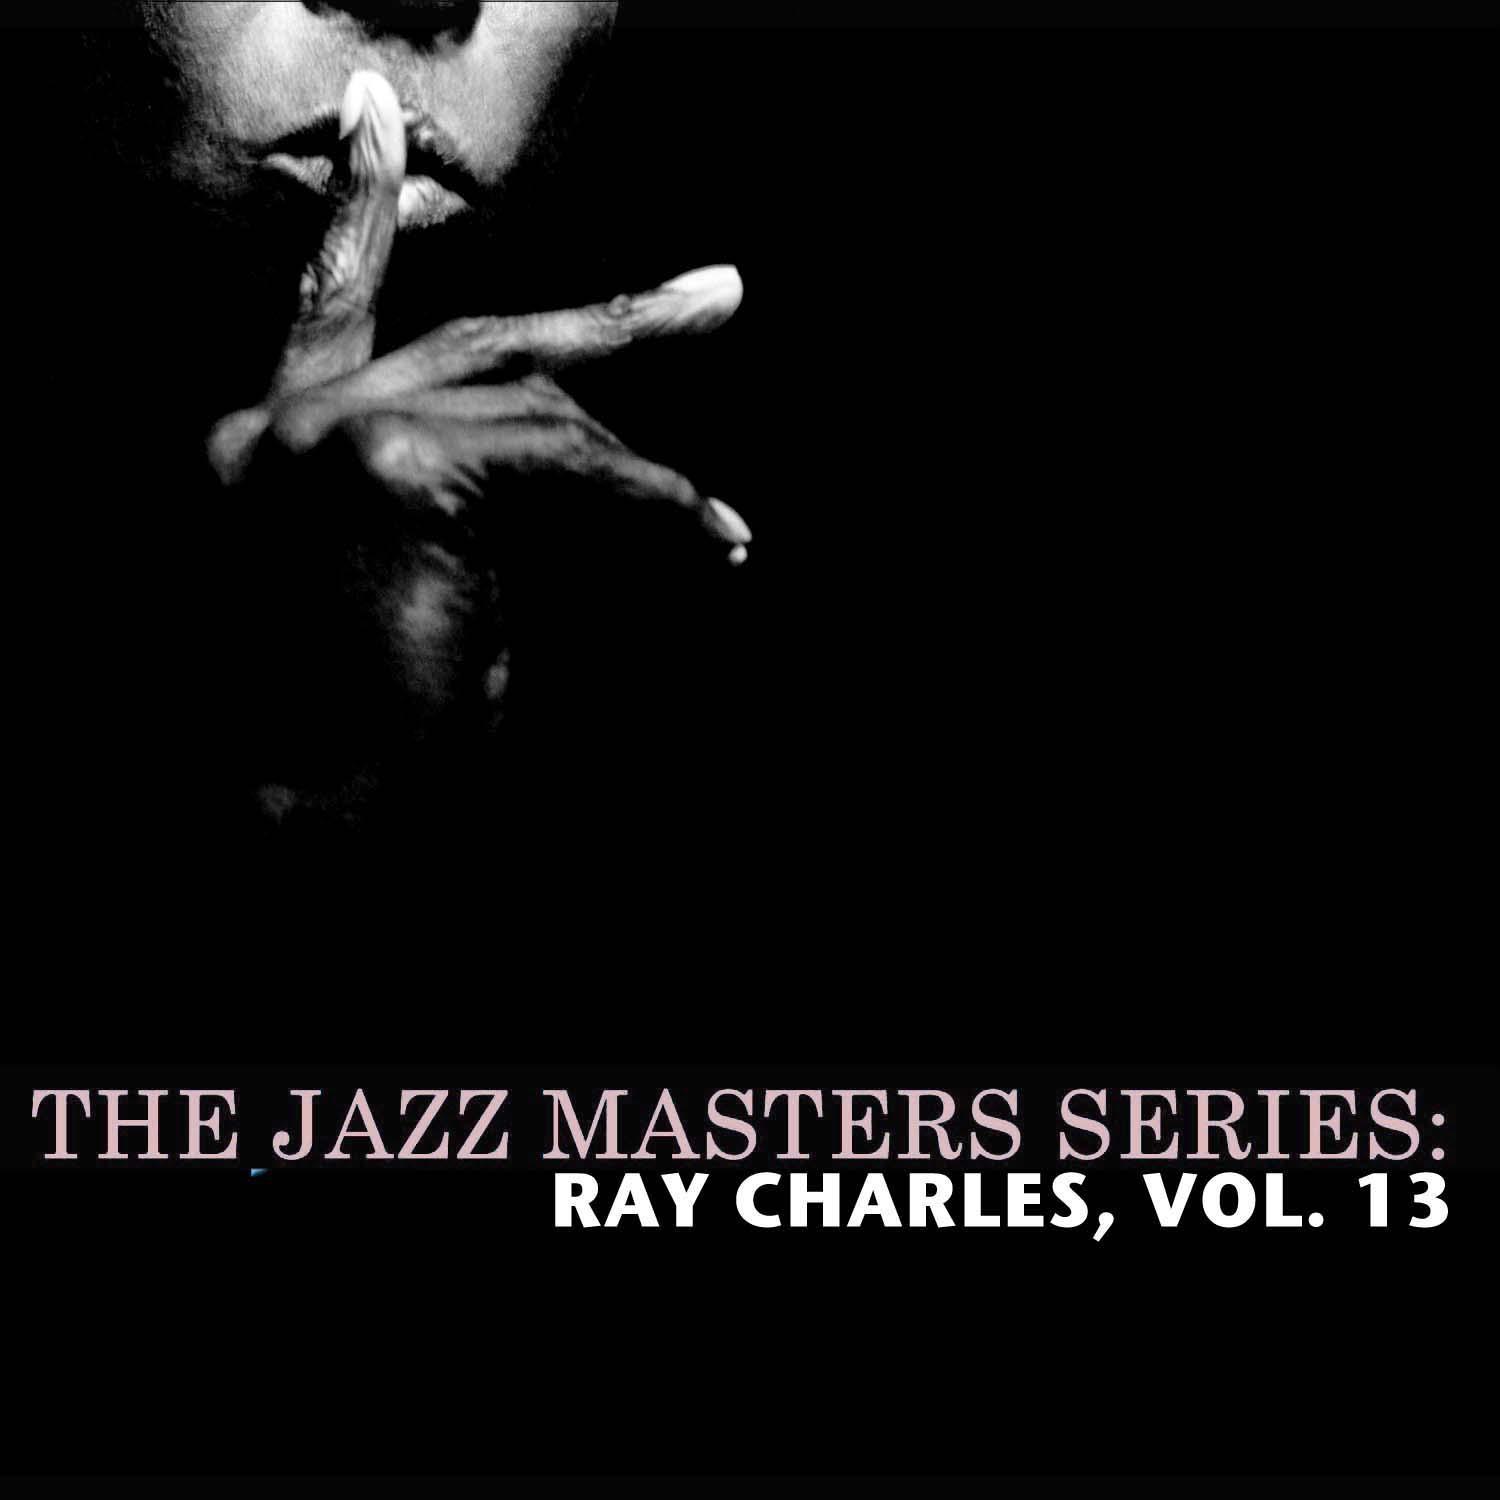 The Jazz Masters Series: Ray Charles, Vol. 13